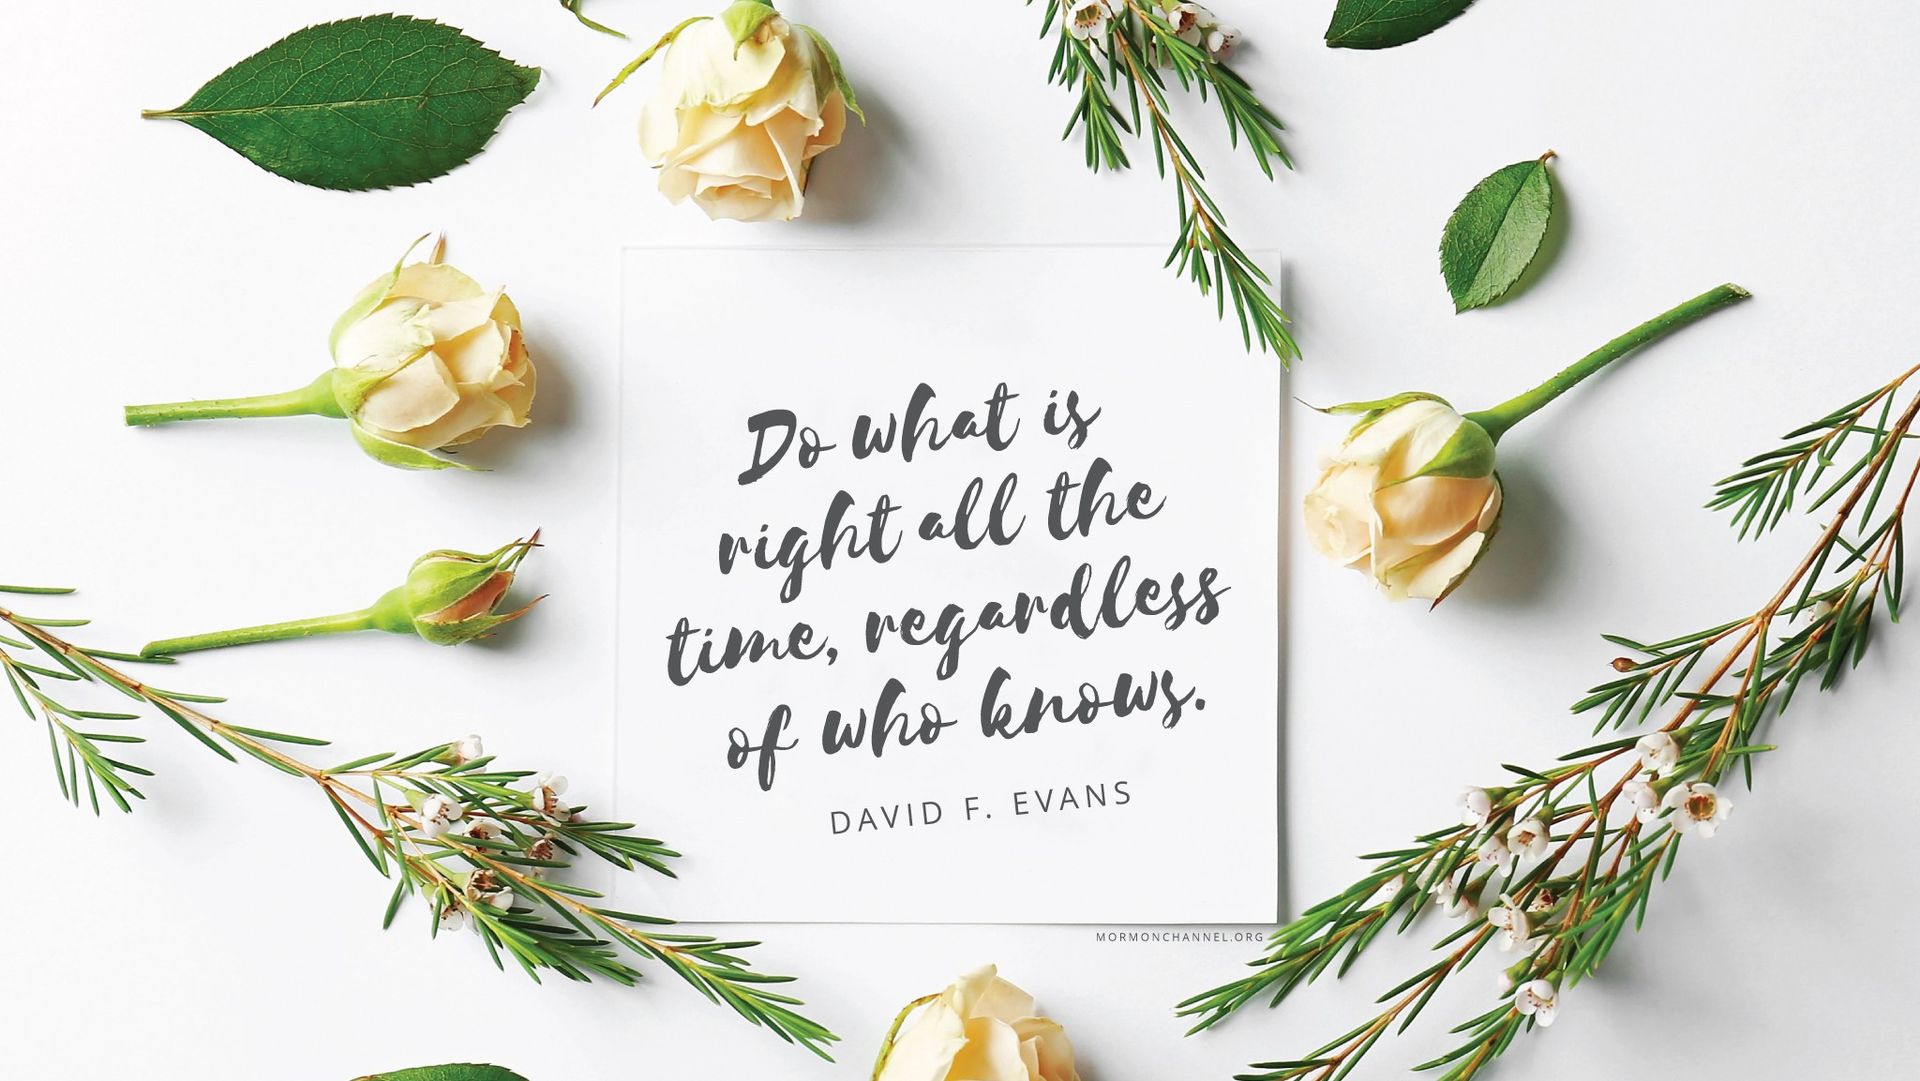 “Do what is right all the time, regardless of who knows.”—Elder David F. Evans, “Tenacity and Discipleship”